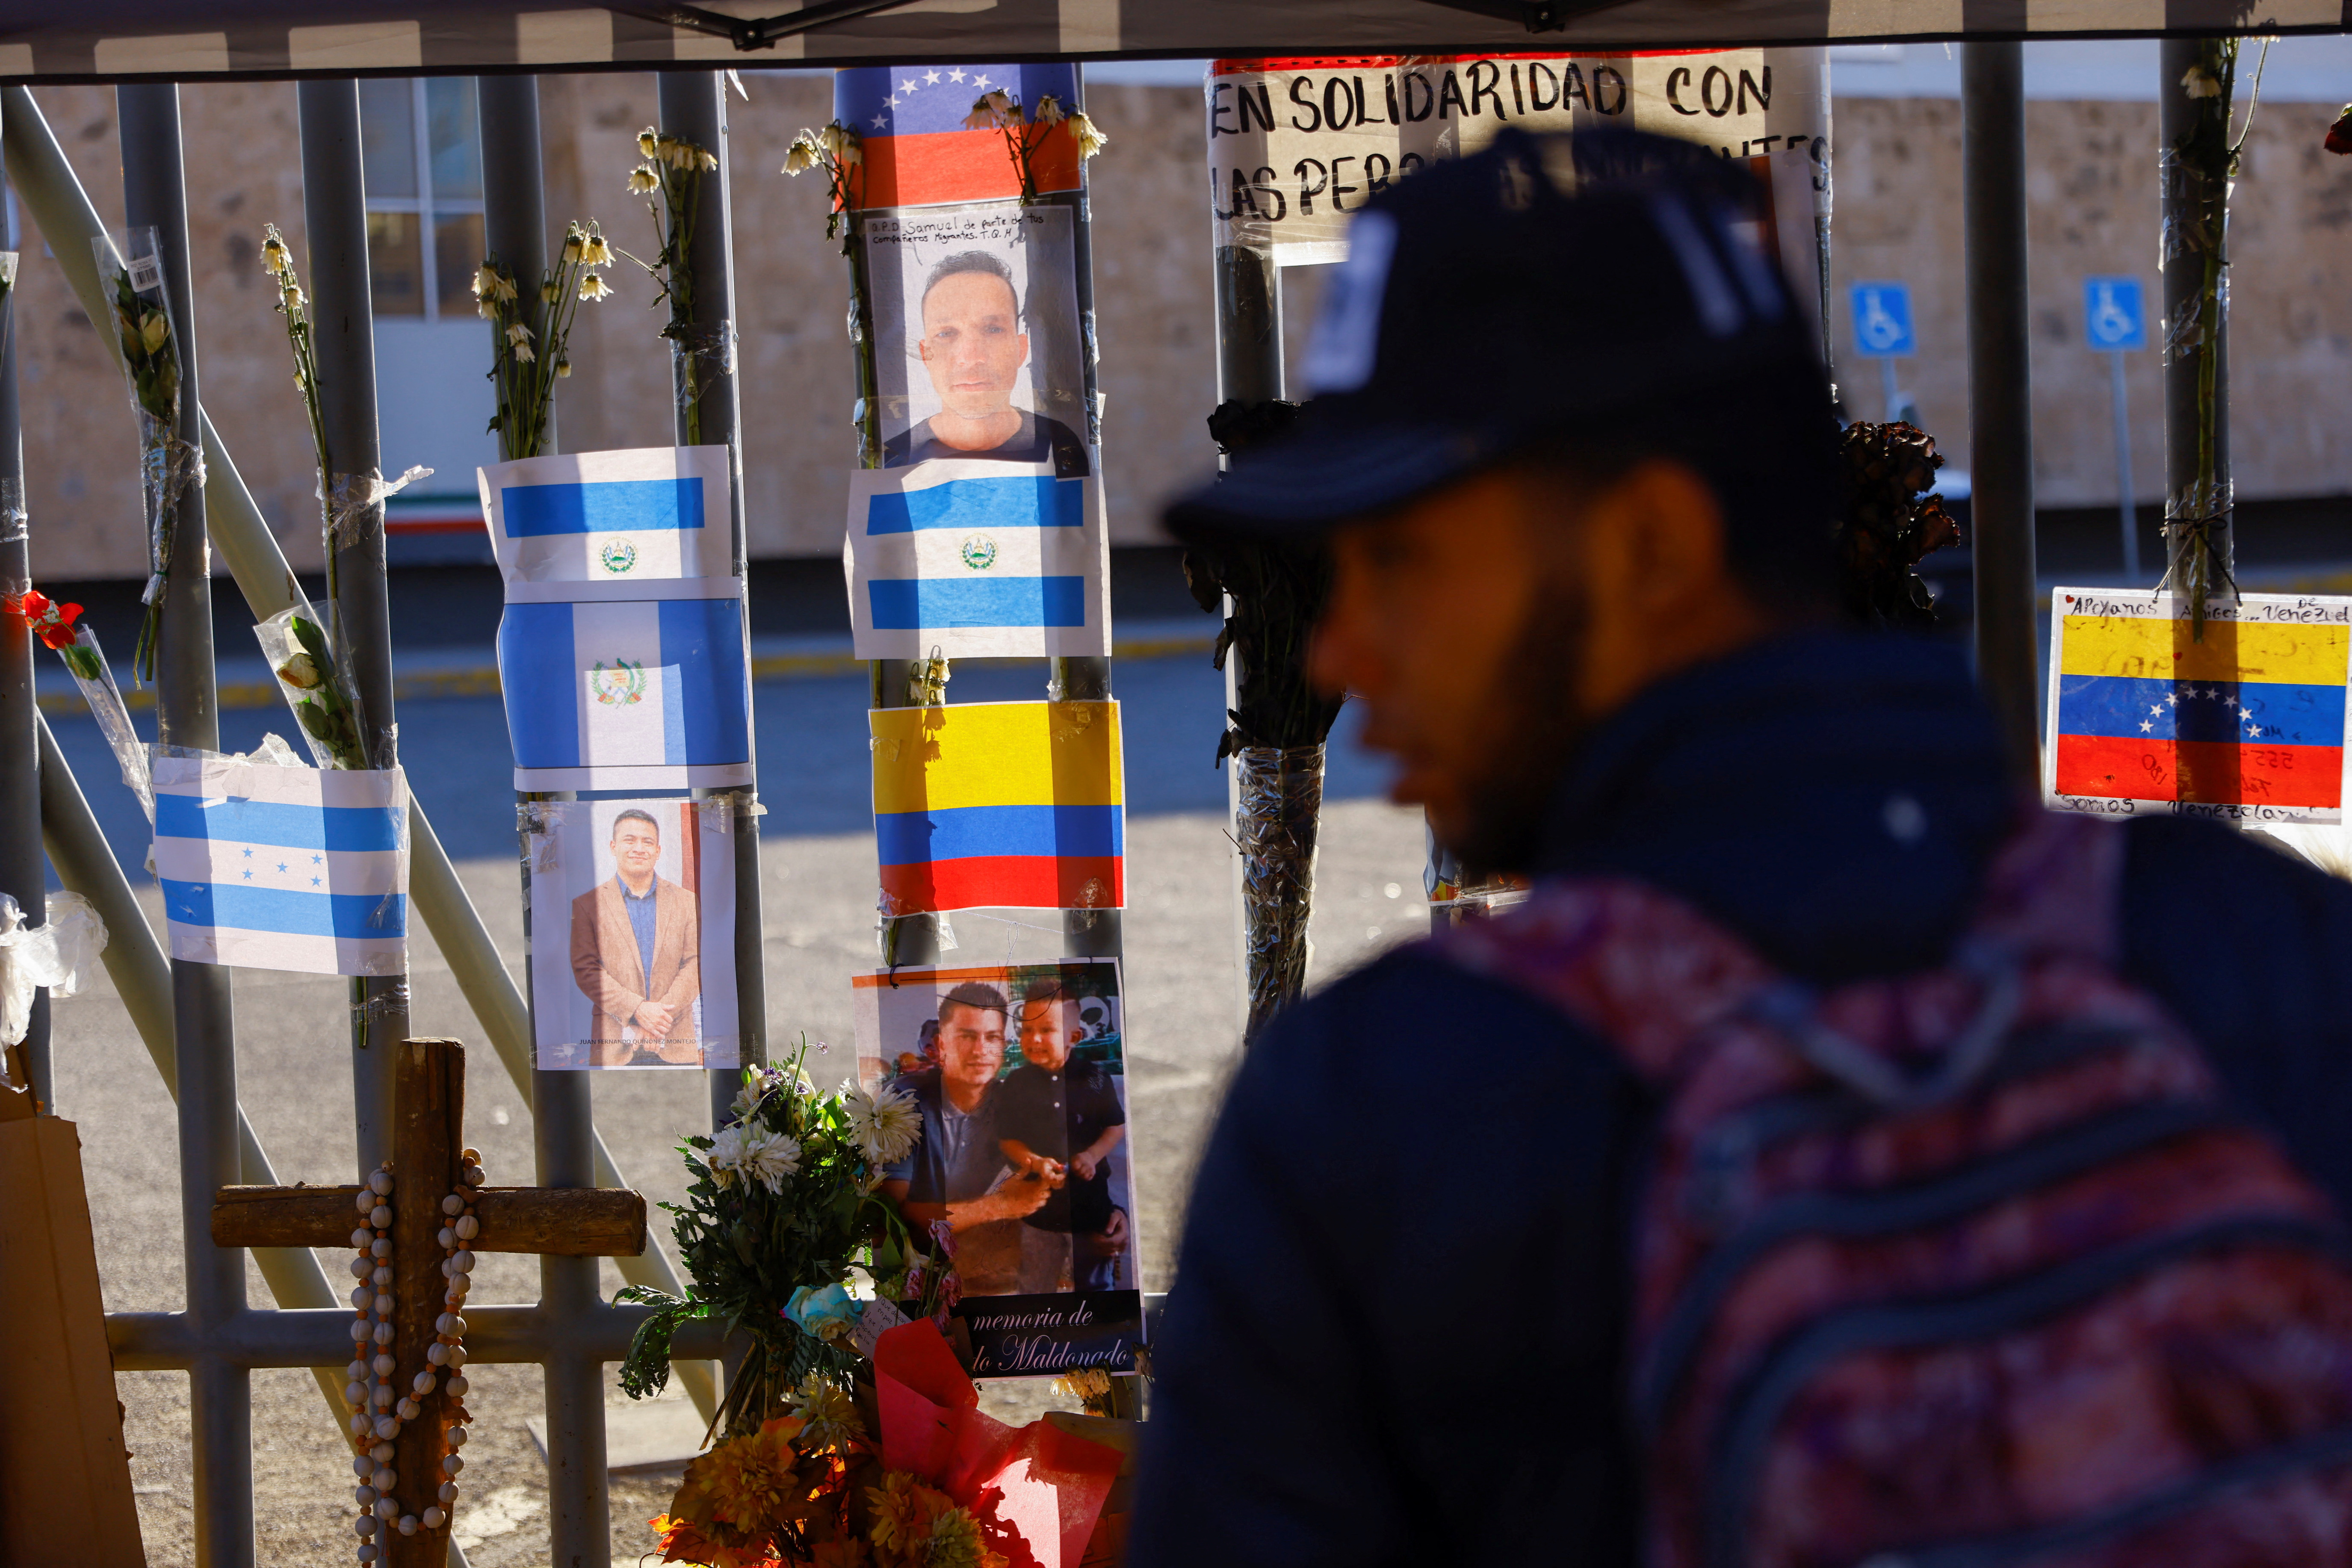 A migrant stands near a makeshift memorial outside the immigration detention center where several migrants died after a fire broke out Monday night, in Ciudad Juarez, Mexico, March 31, 2023. Photo: REUTERS/Jose Luis Gonzales